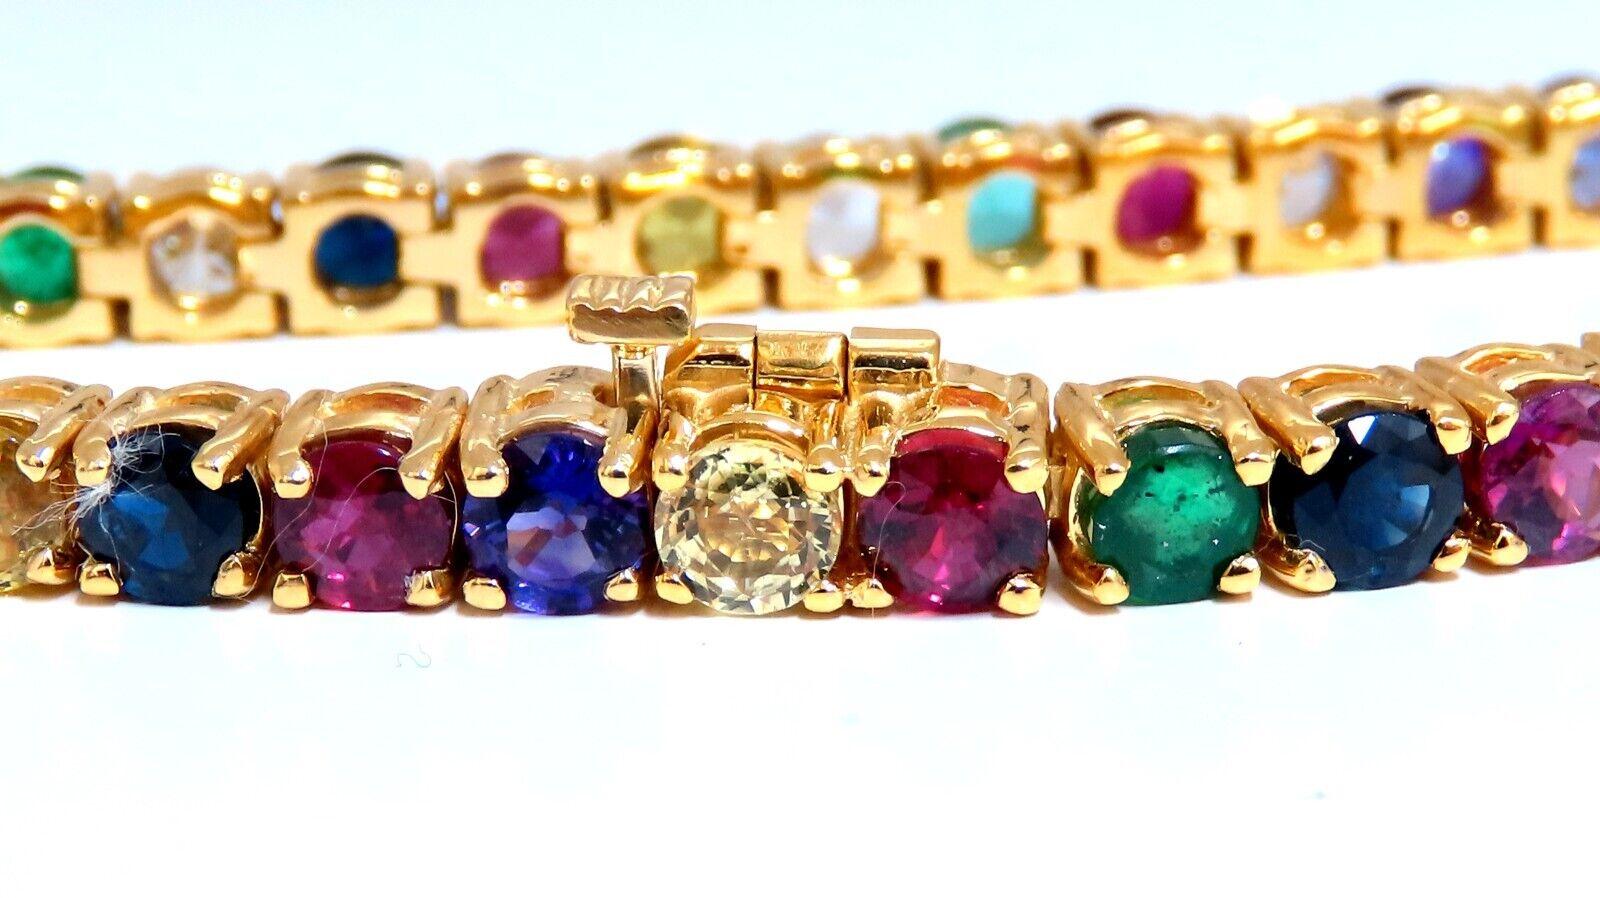 Natural Multi color Gem Line Bracelet

11.80ct Ruby, Amethyst, Emerald, multi-color Sapphires 

(Orange, Yellow, Blue, Pink)

Round cuts, Clean Clarity.

(5) 1.25ct Round Diamonds

H-I color Vs-2 Si-1 clarity

Secure pressure clasp and safety